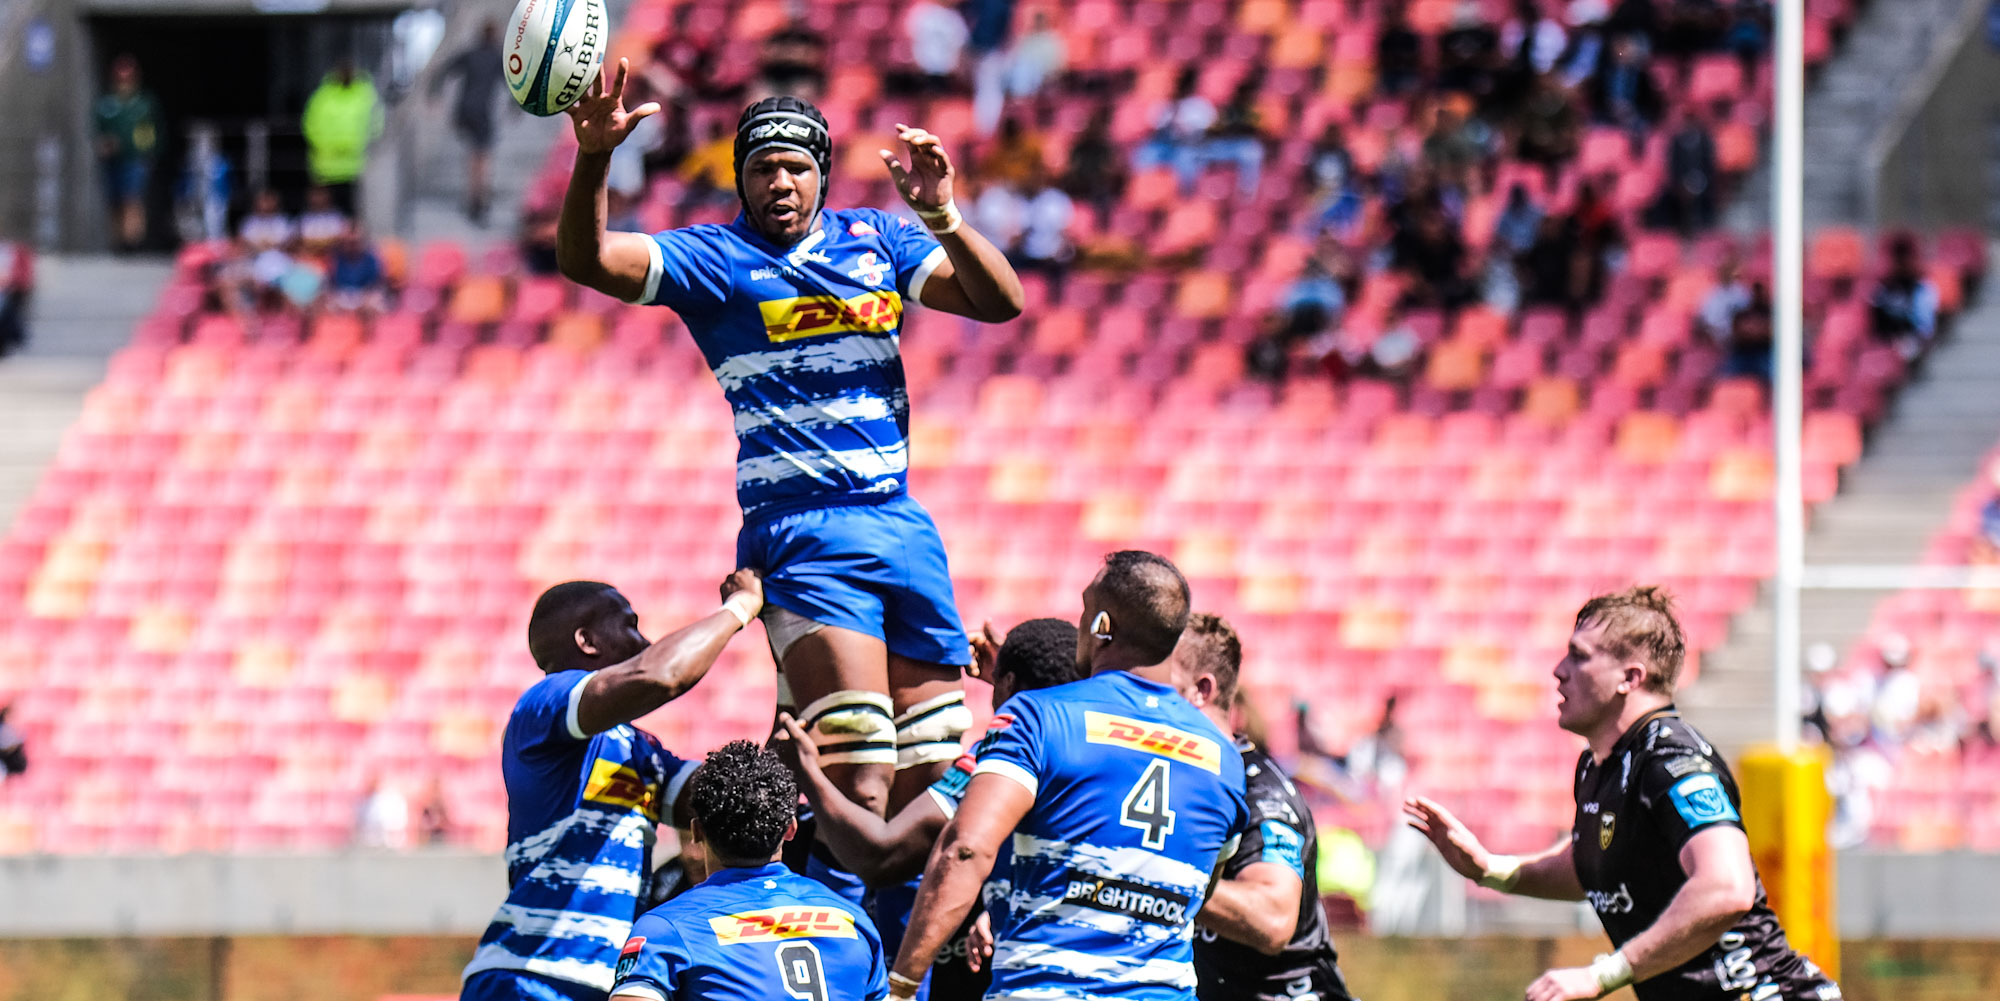 Marvin Orie standing tall in a lineout for the DHL Stormers.